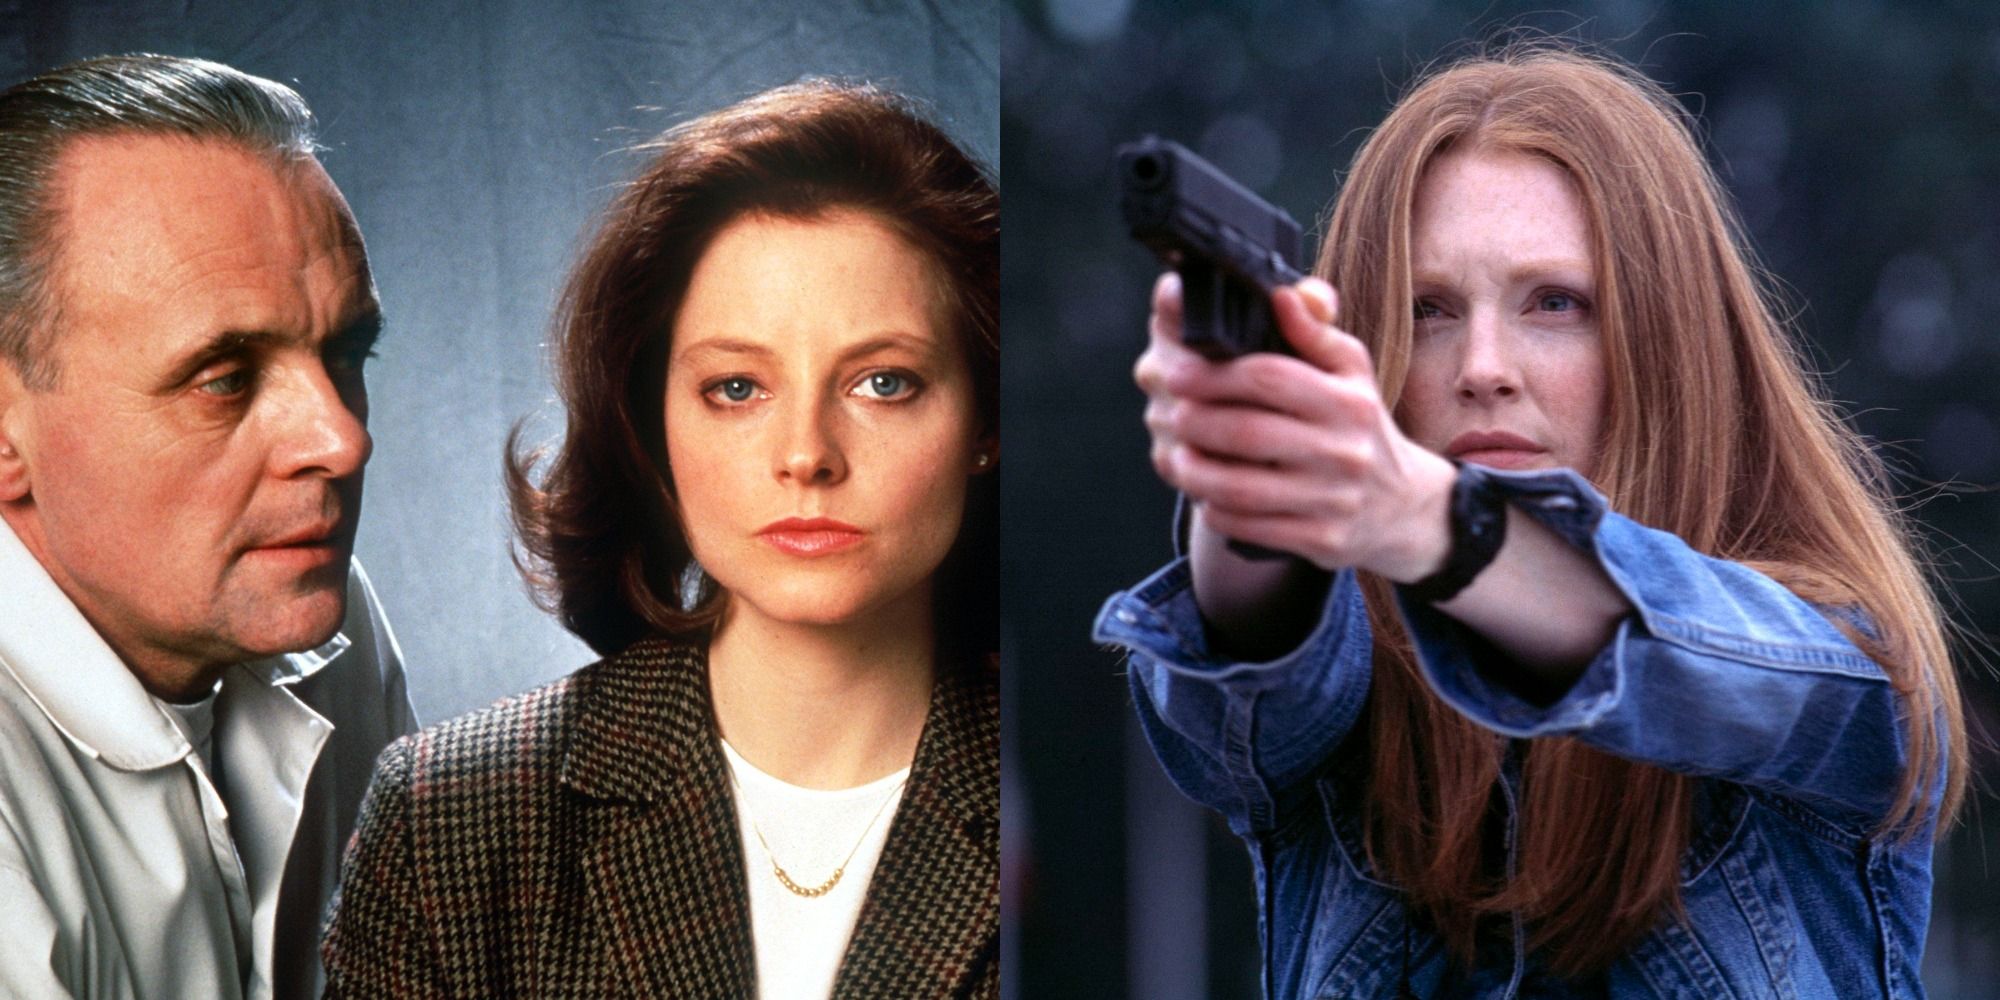 side by side images of Anthony Hopkins, Jodie Foster and Julianne Moore in the Hannibal Lecter films